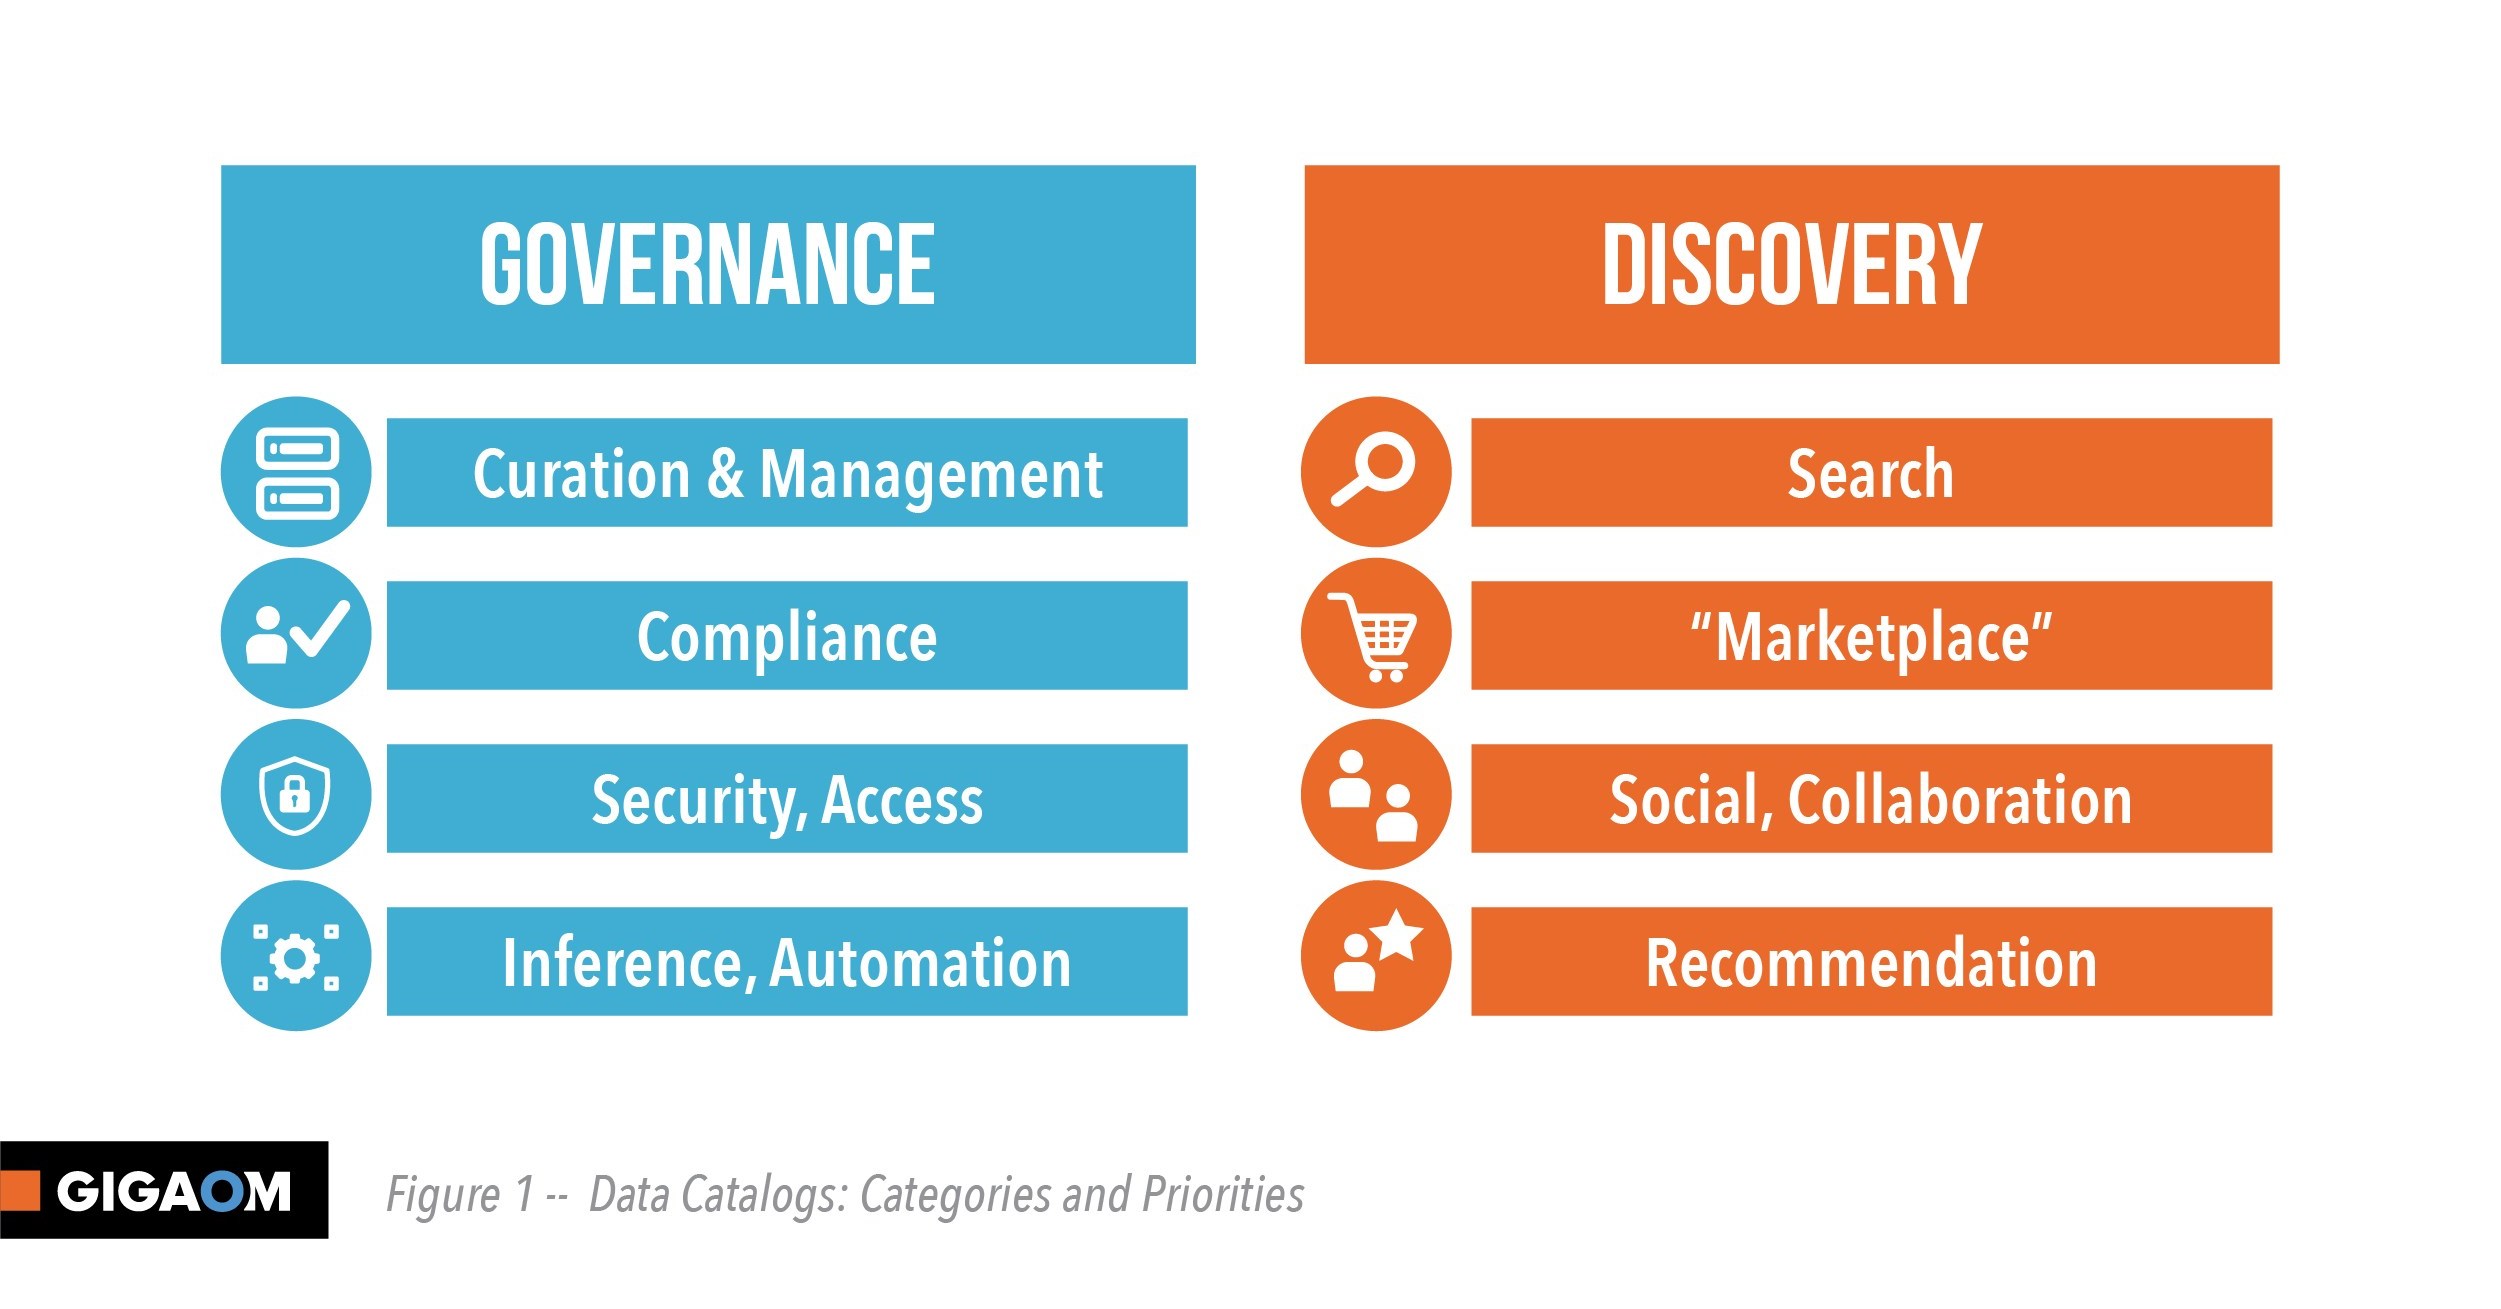 Data product data marketplace data Governance. Data Governance and Discovery. Categories catalog. Гигаом. Дата маркетплейс